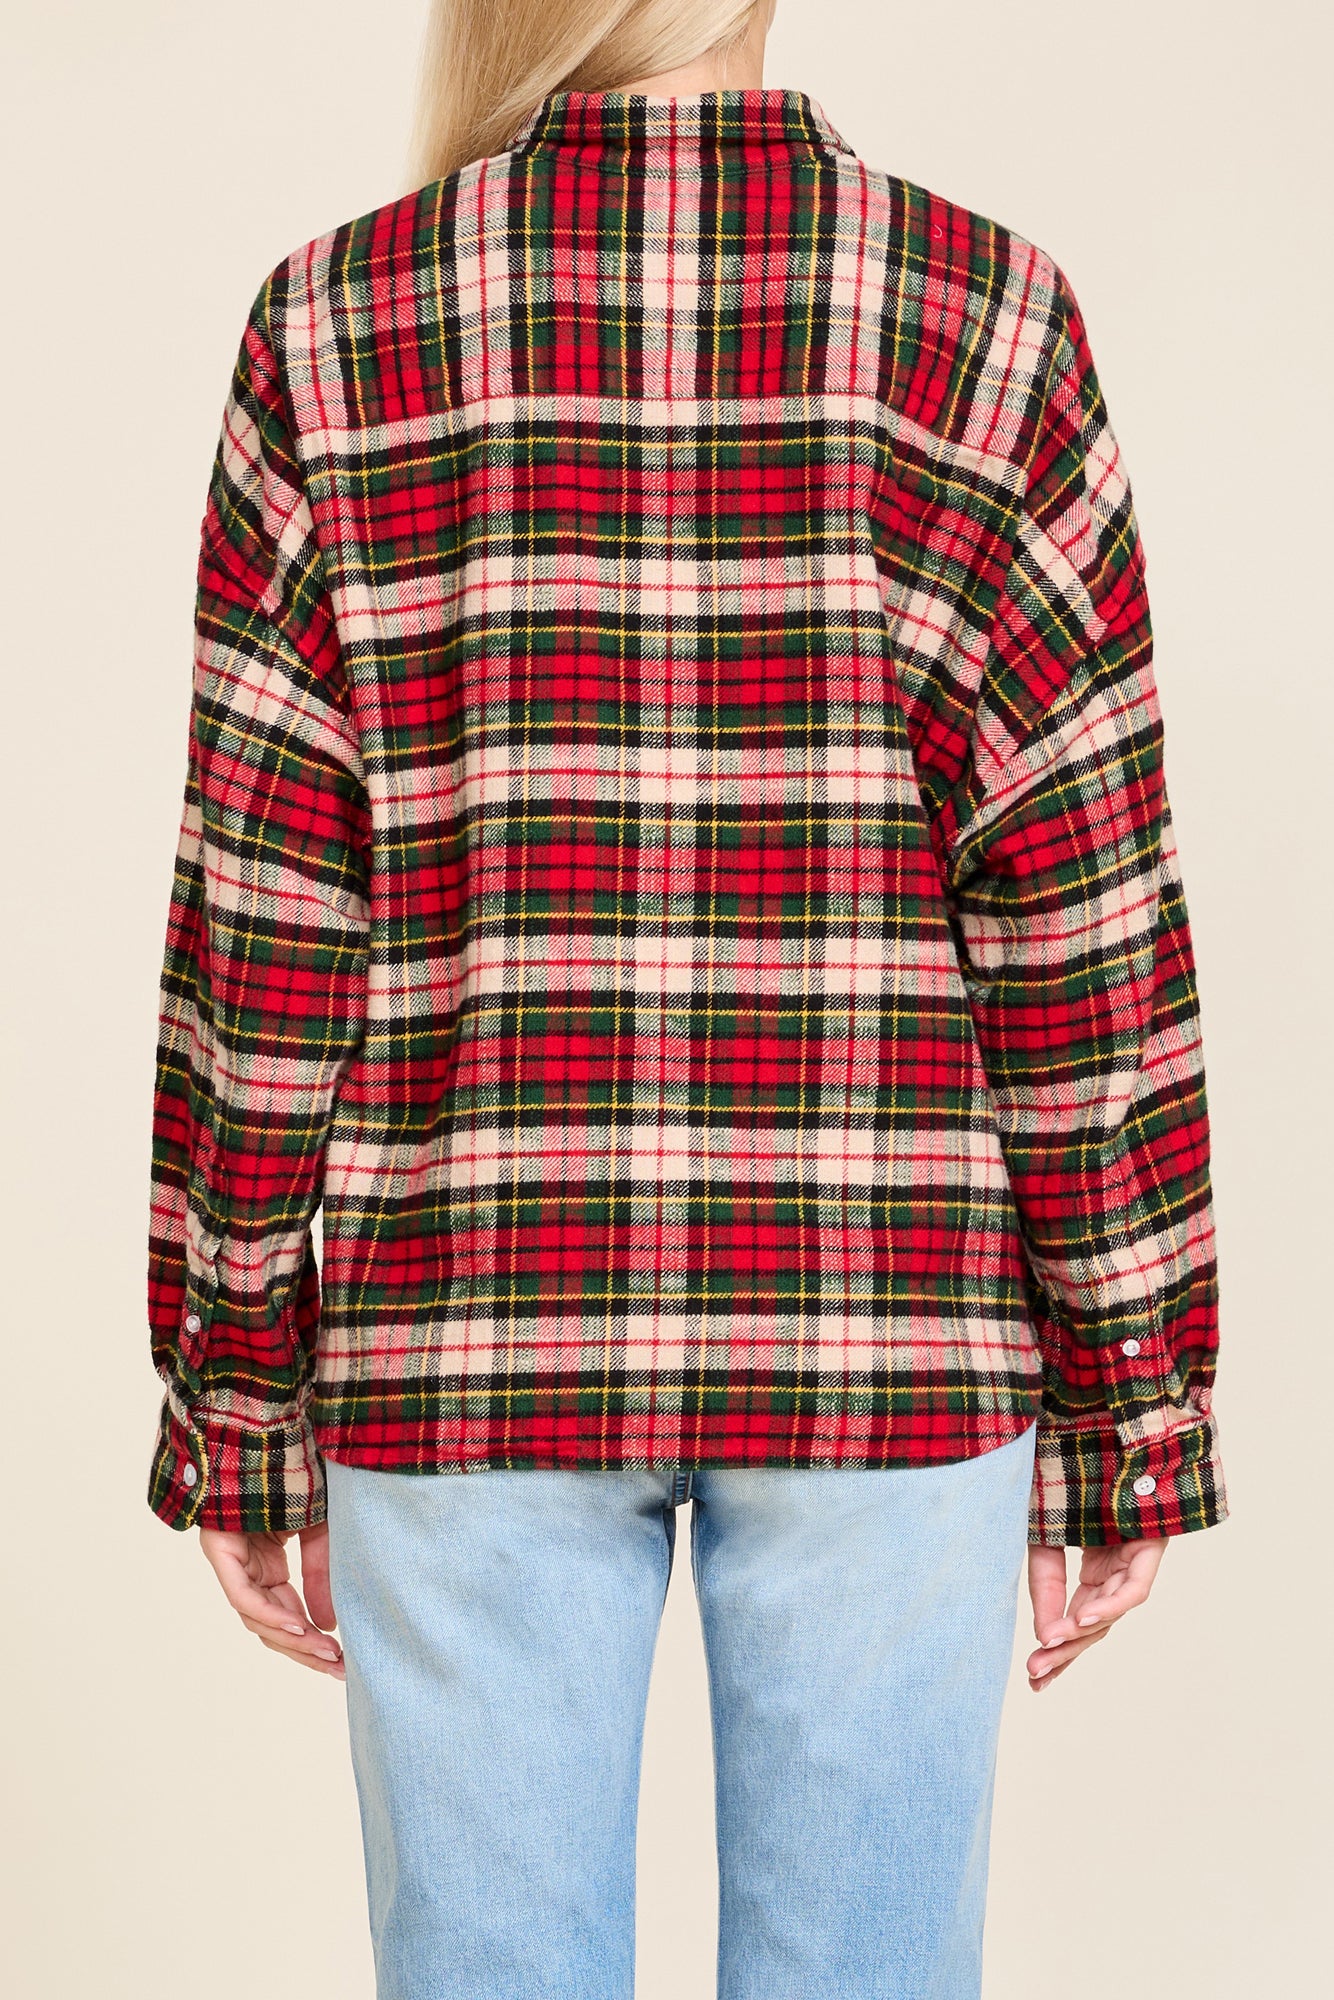 Cropped Shirt - Red/ Green Plaid